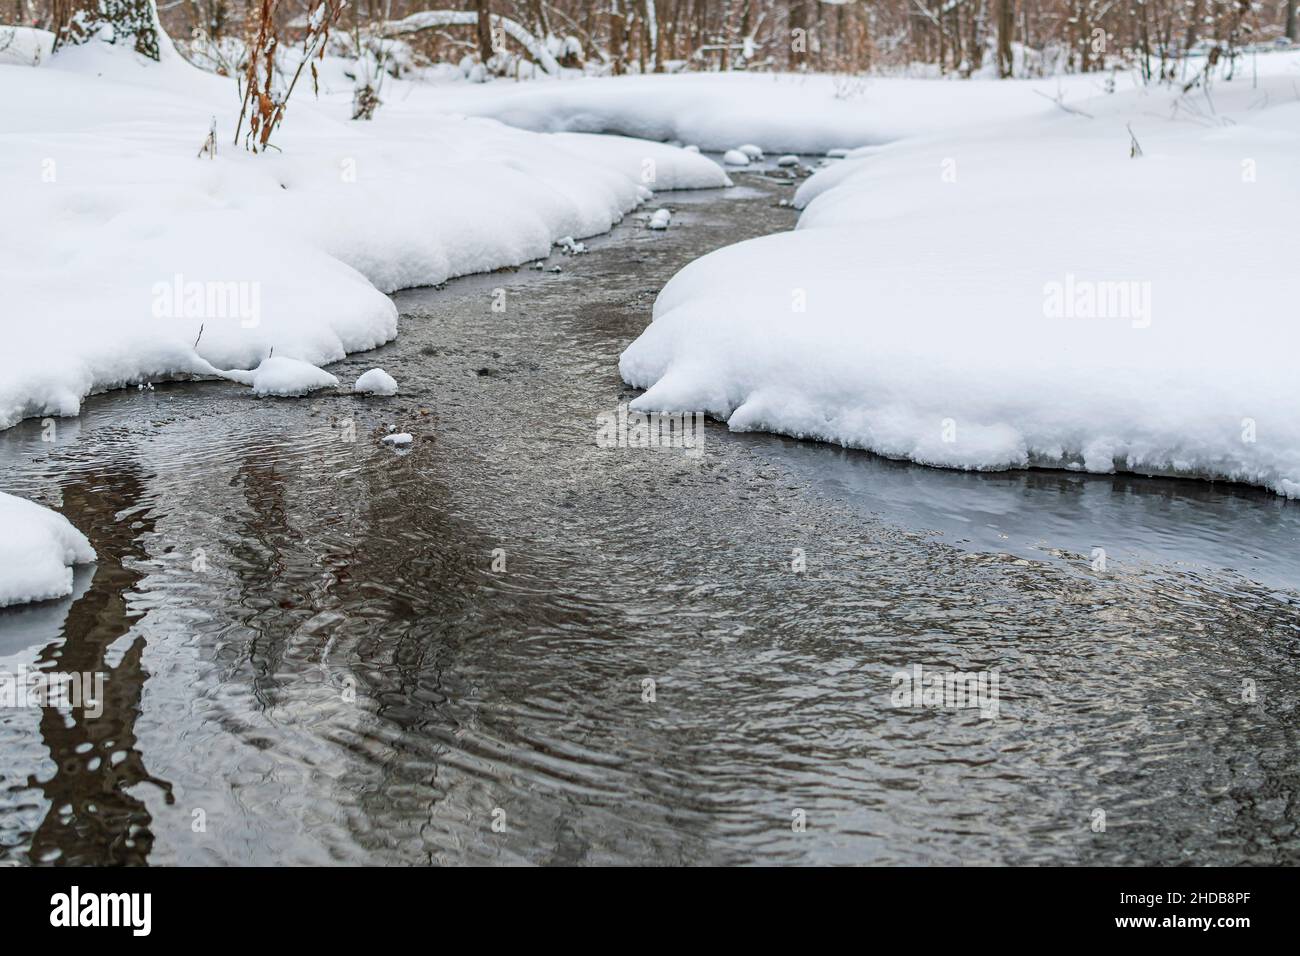 Winter landscape with an unstoppable stream of water (stream) surrounded by white snows. Stock Photo